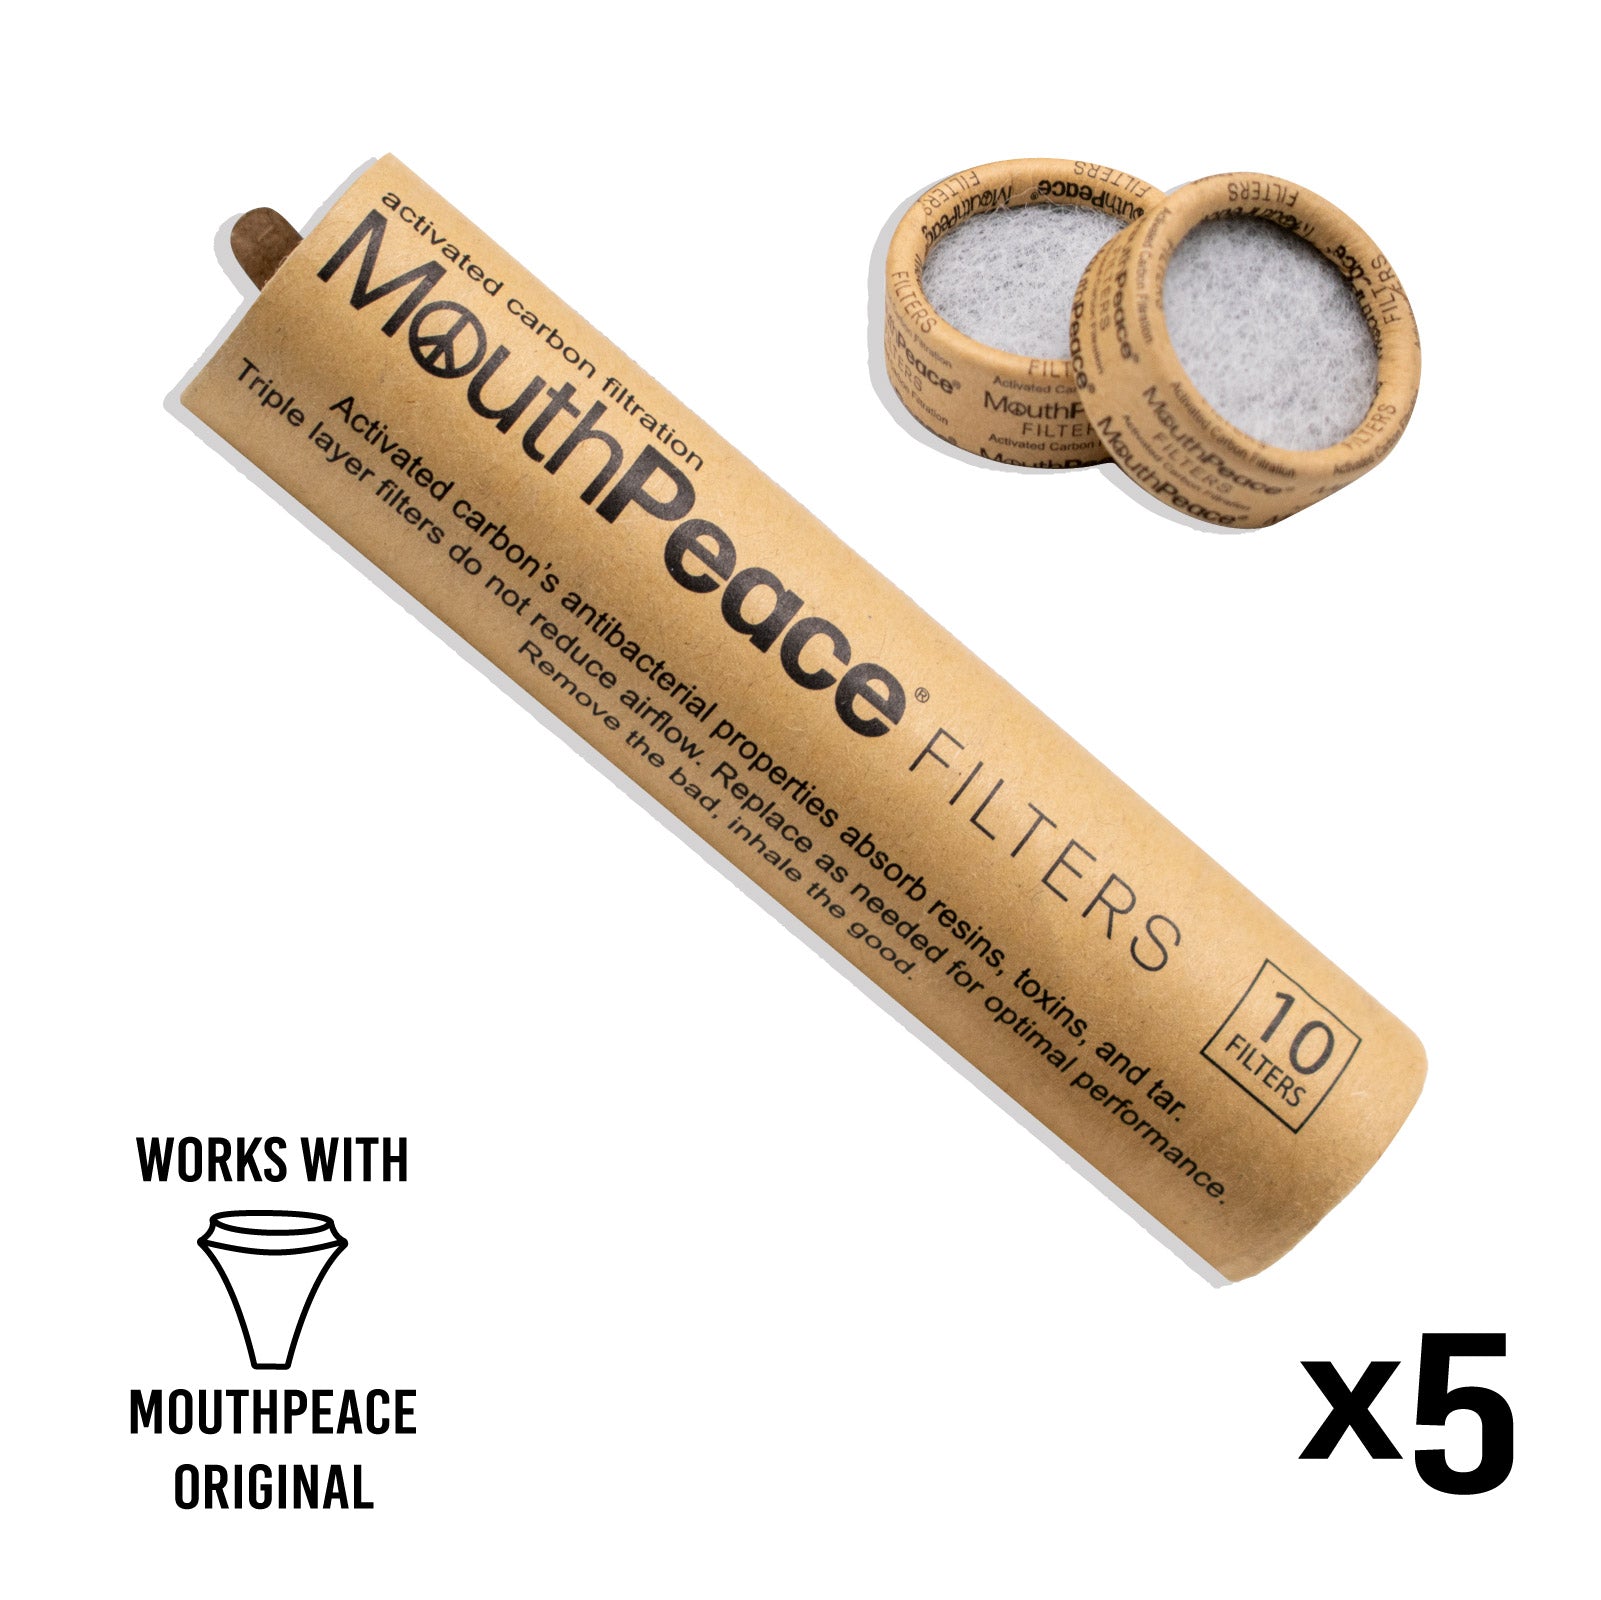 MouthPeace Carbon Filter Rolls x5 - Moose Labs LLC